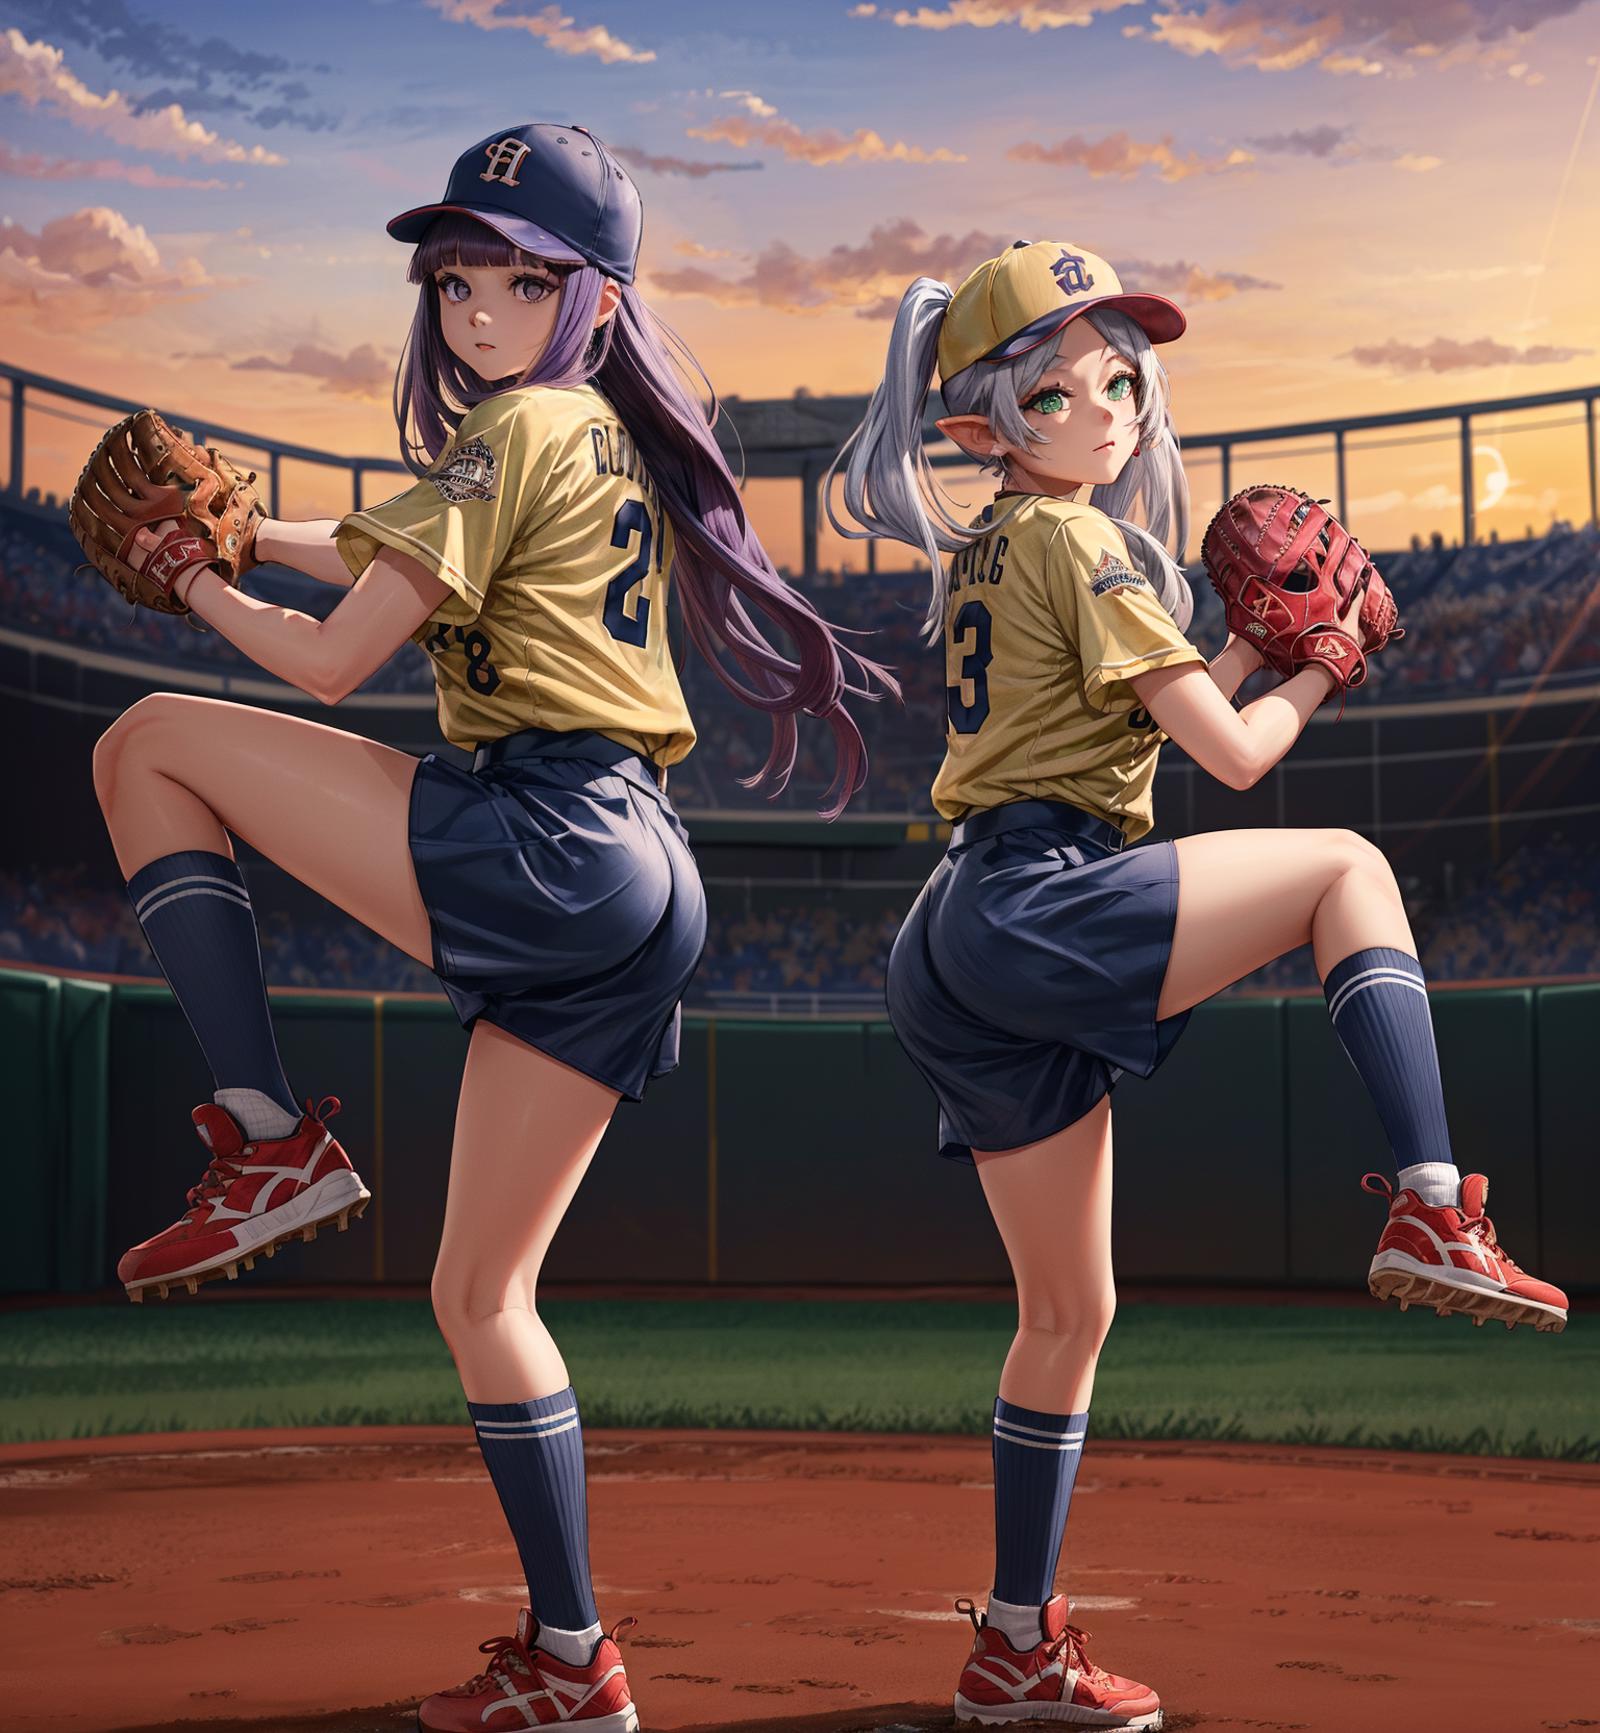 Two young female baseball players standing on a field, each holding a baseball glove.